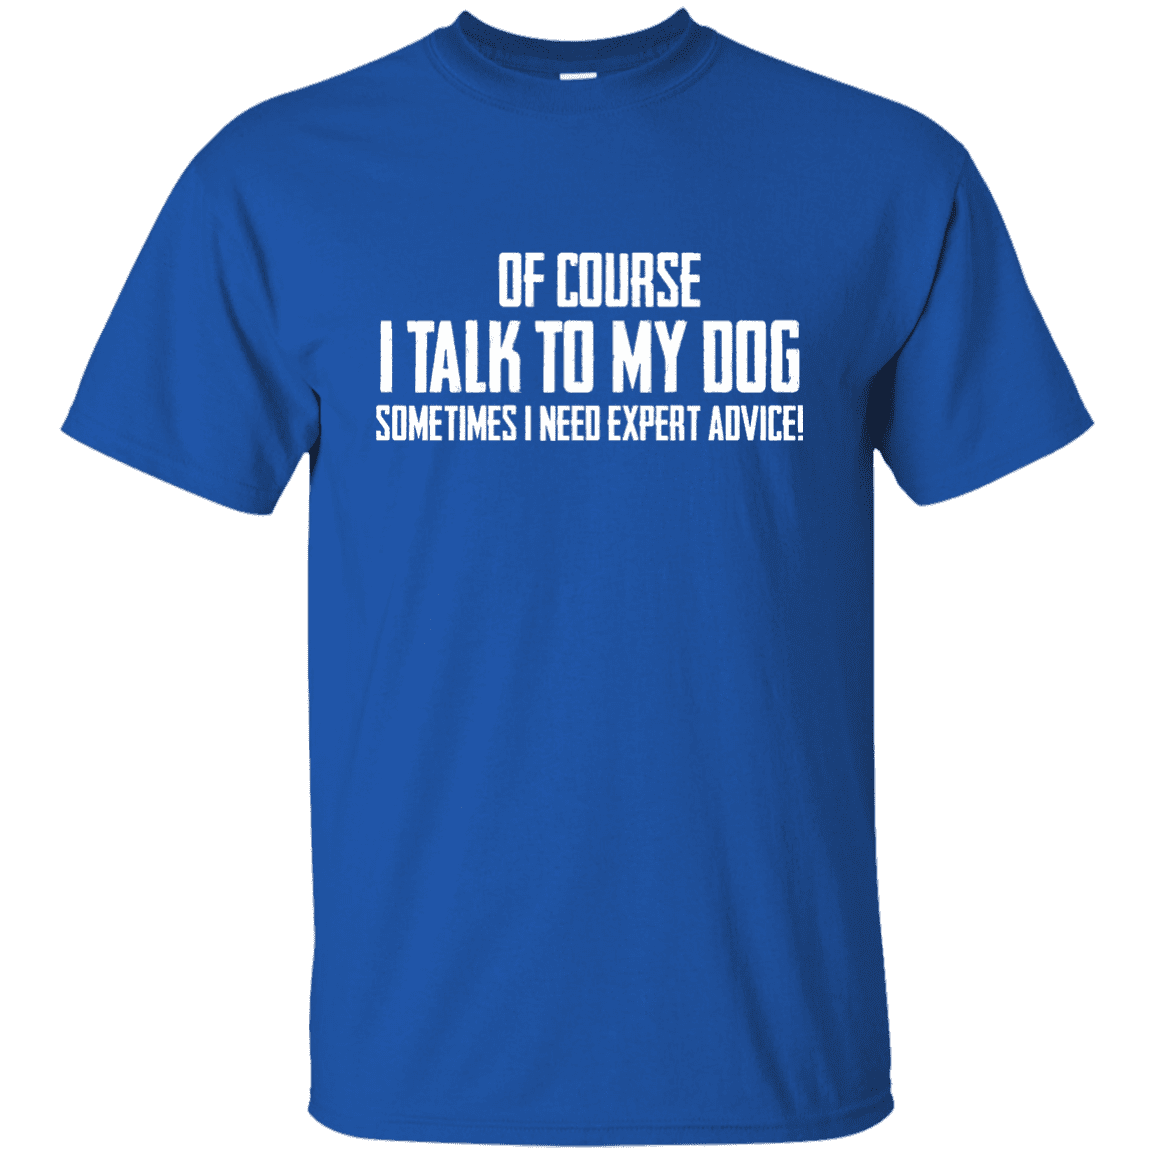 Of Course I Talk To My Dog - T Shirt – Rescuers Club